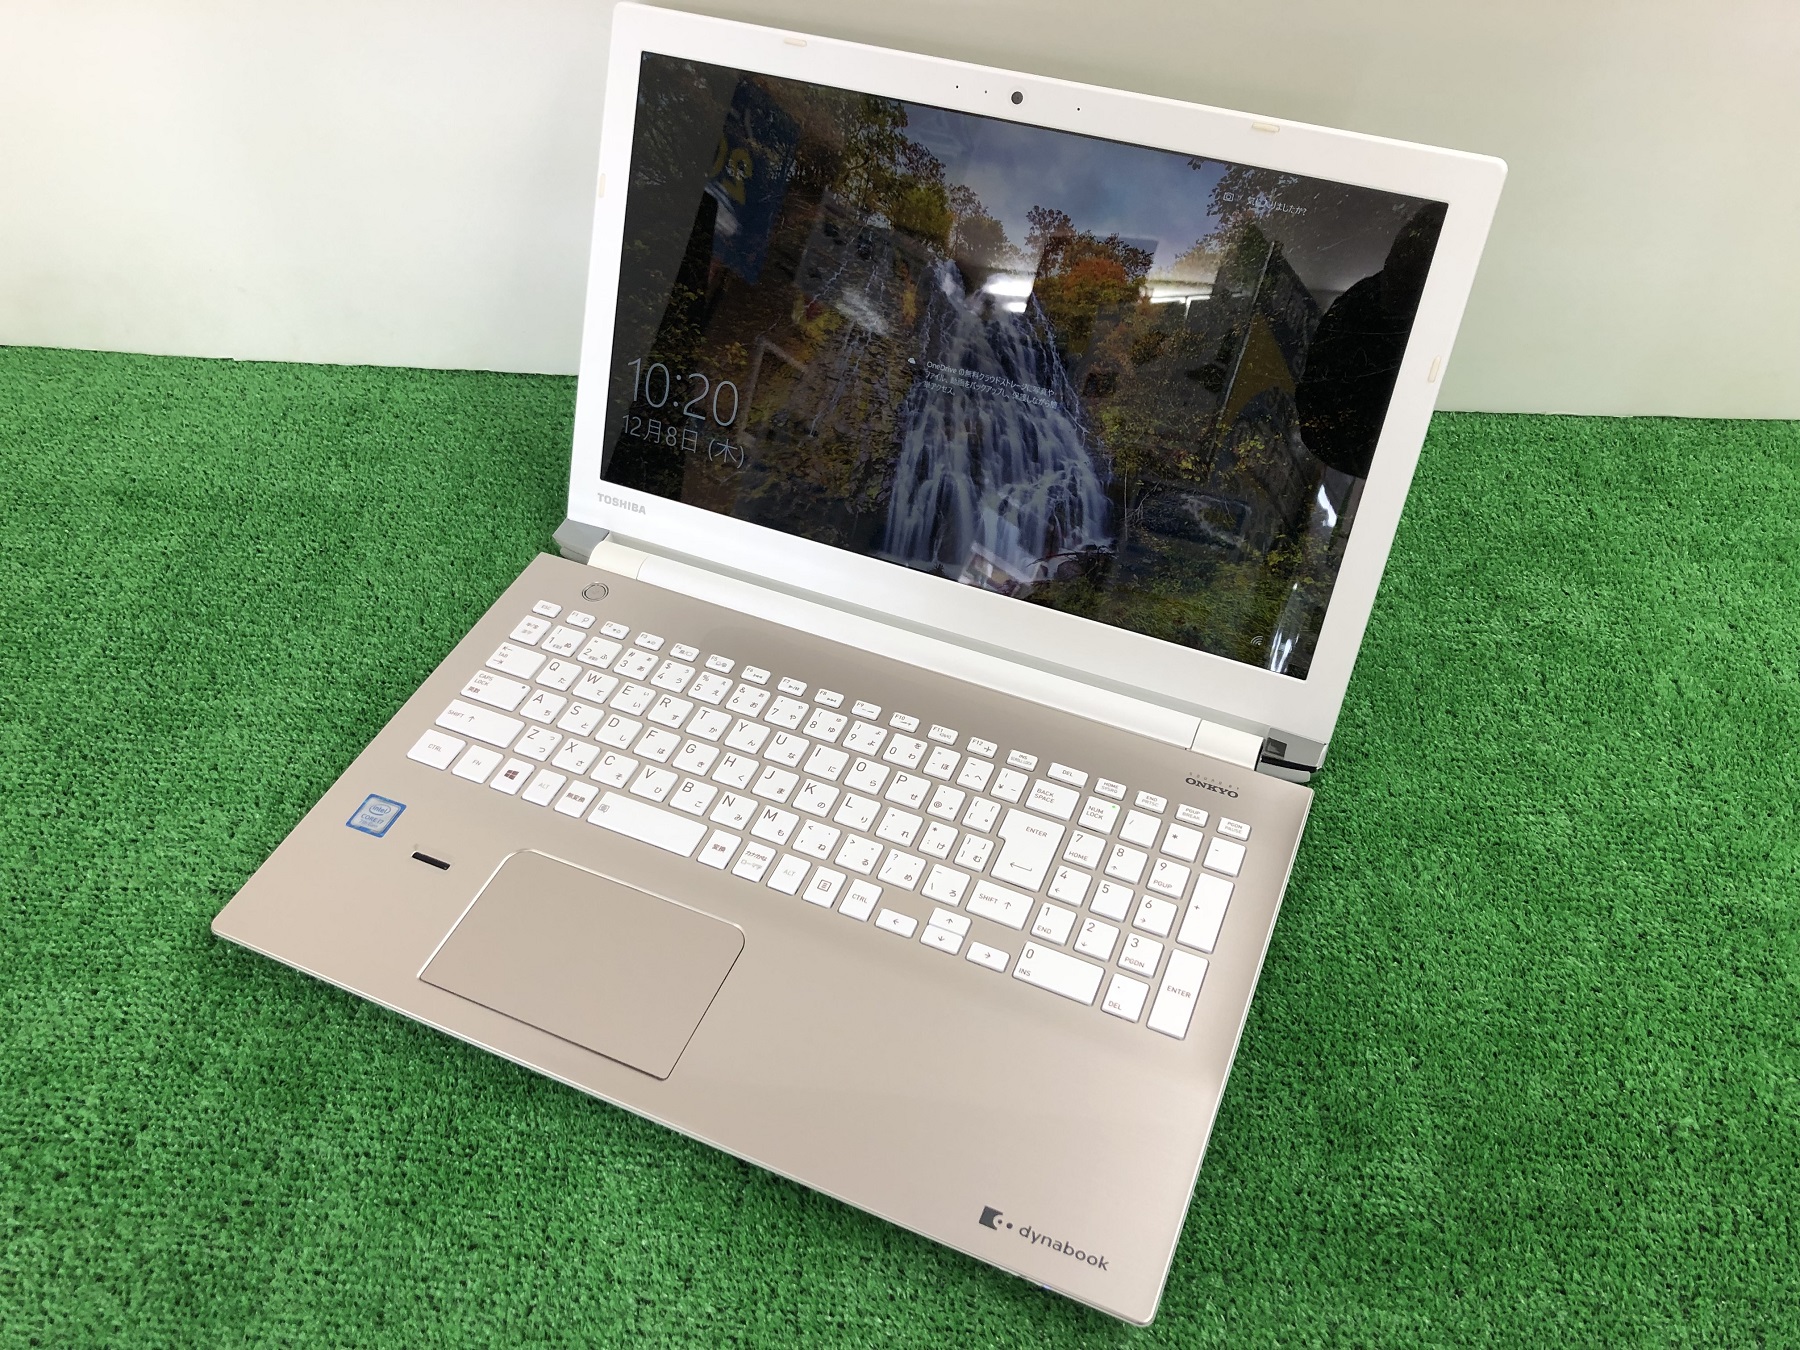 PC/タブレット ノートPC 東芝 dynabook T75/DGS 2017年モデル CPU：Core i7 7500U 2.7GHz 